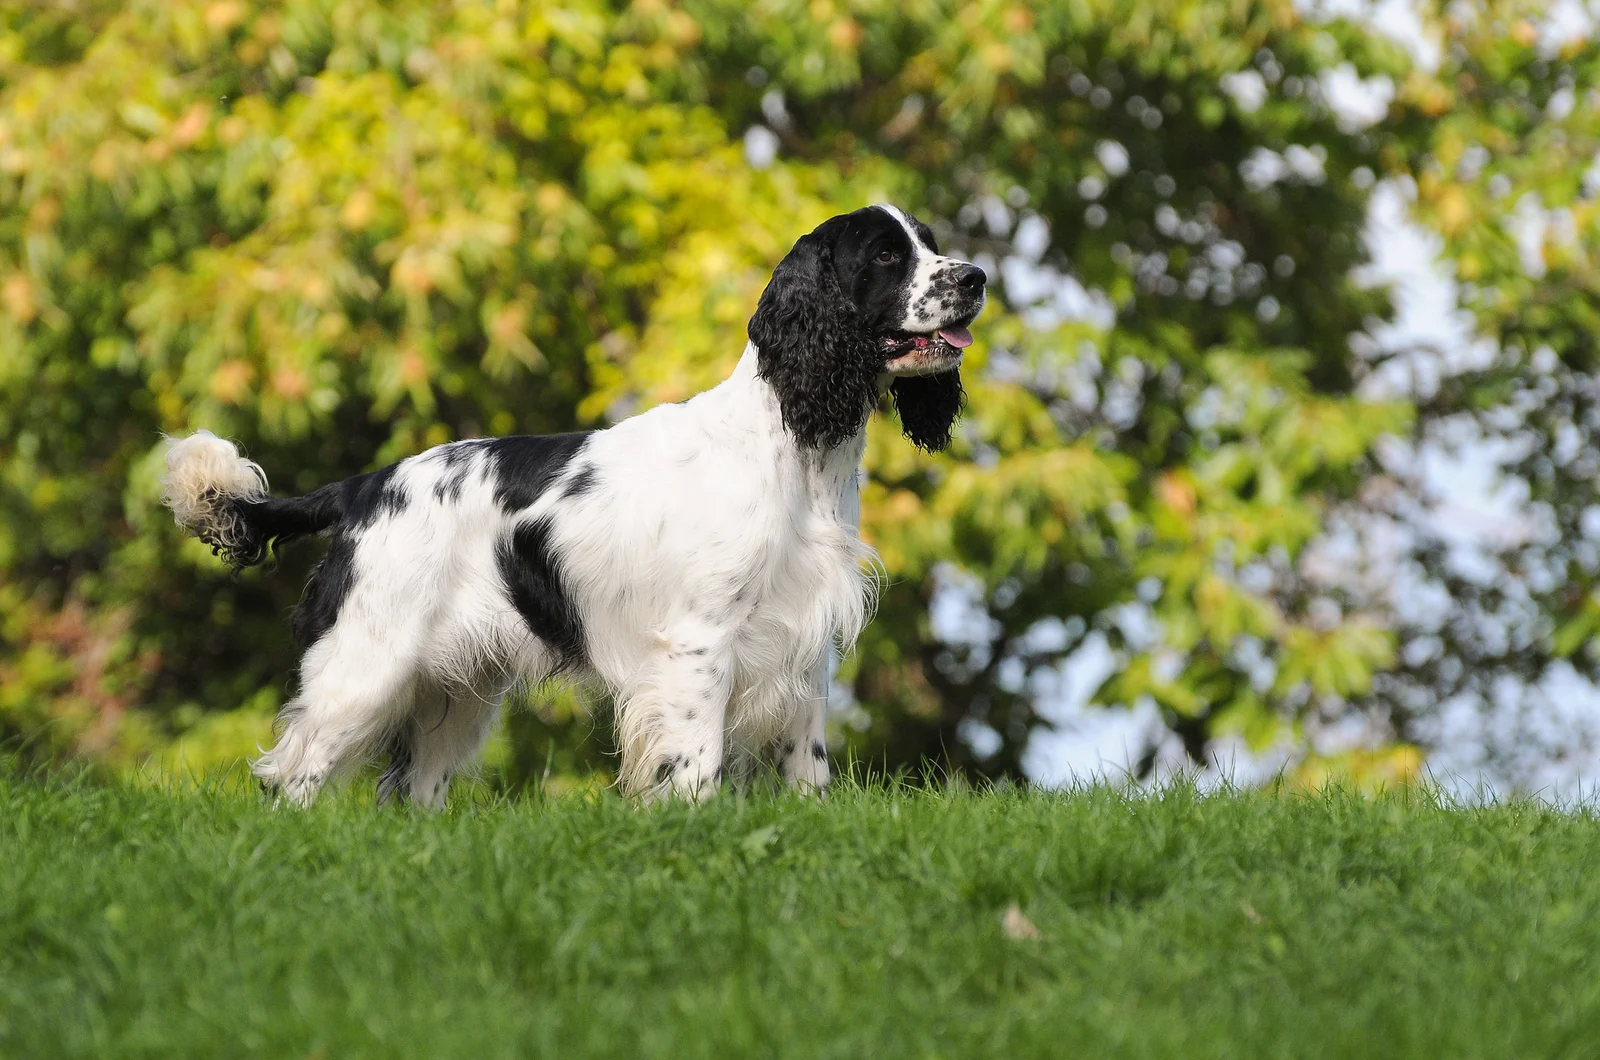 English Springer Spaniels stand sideways and look ahead